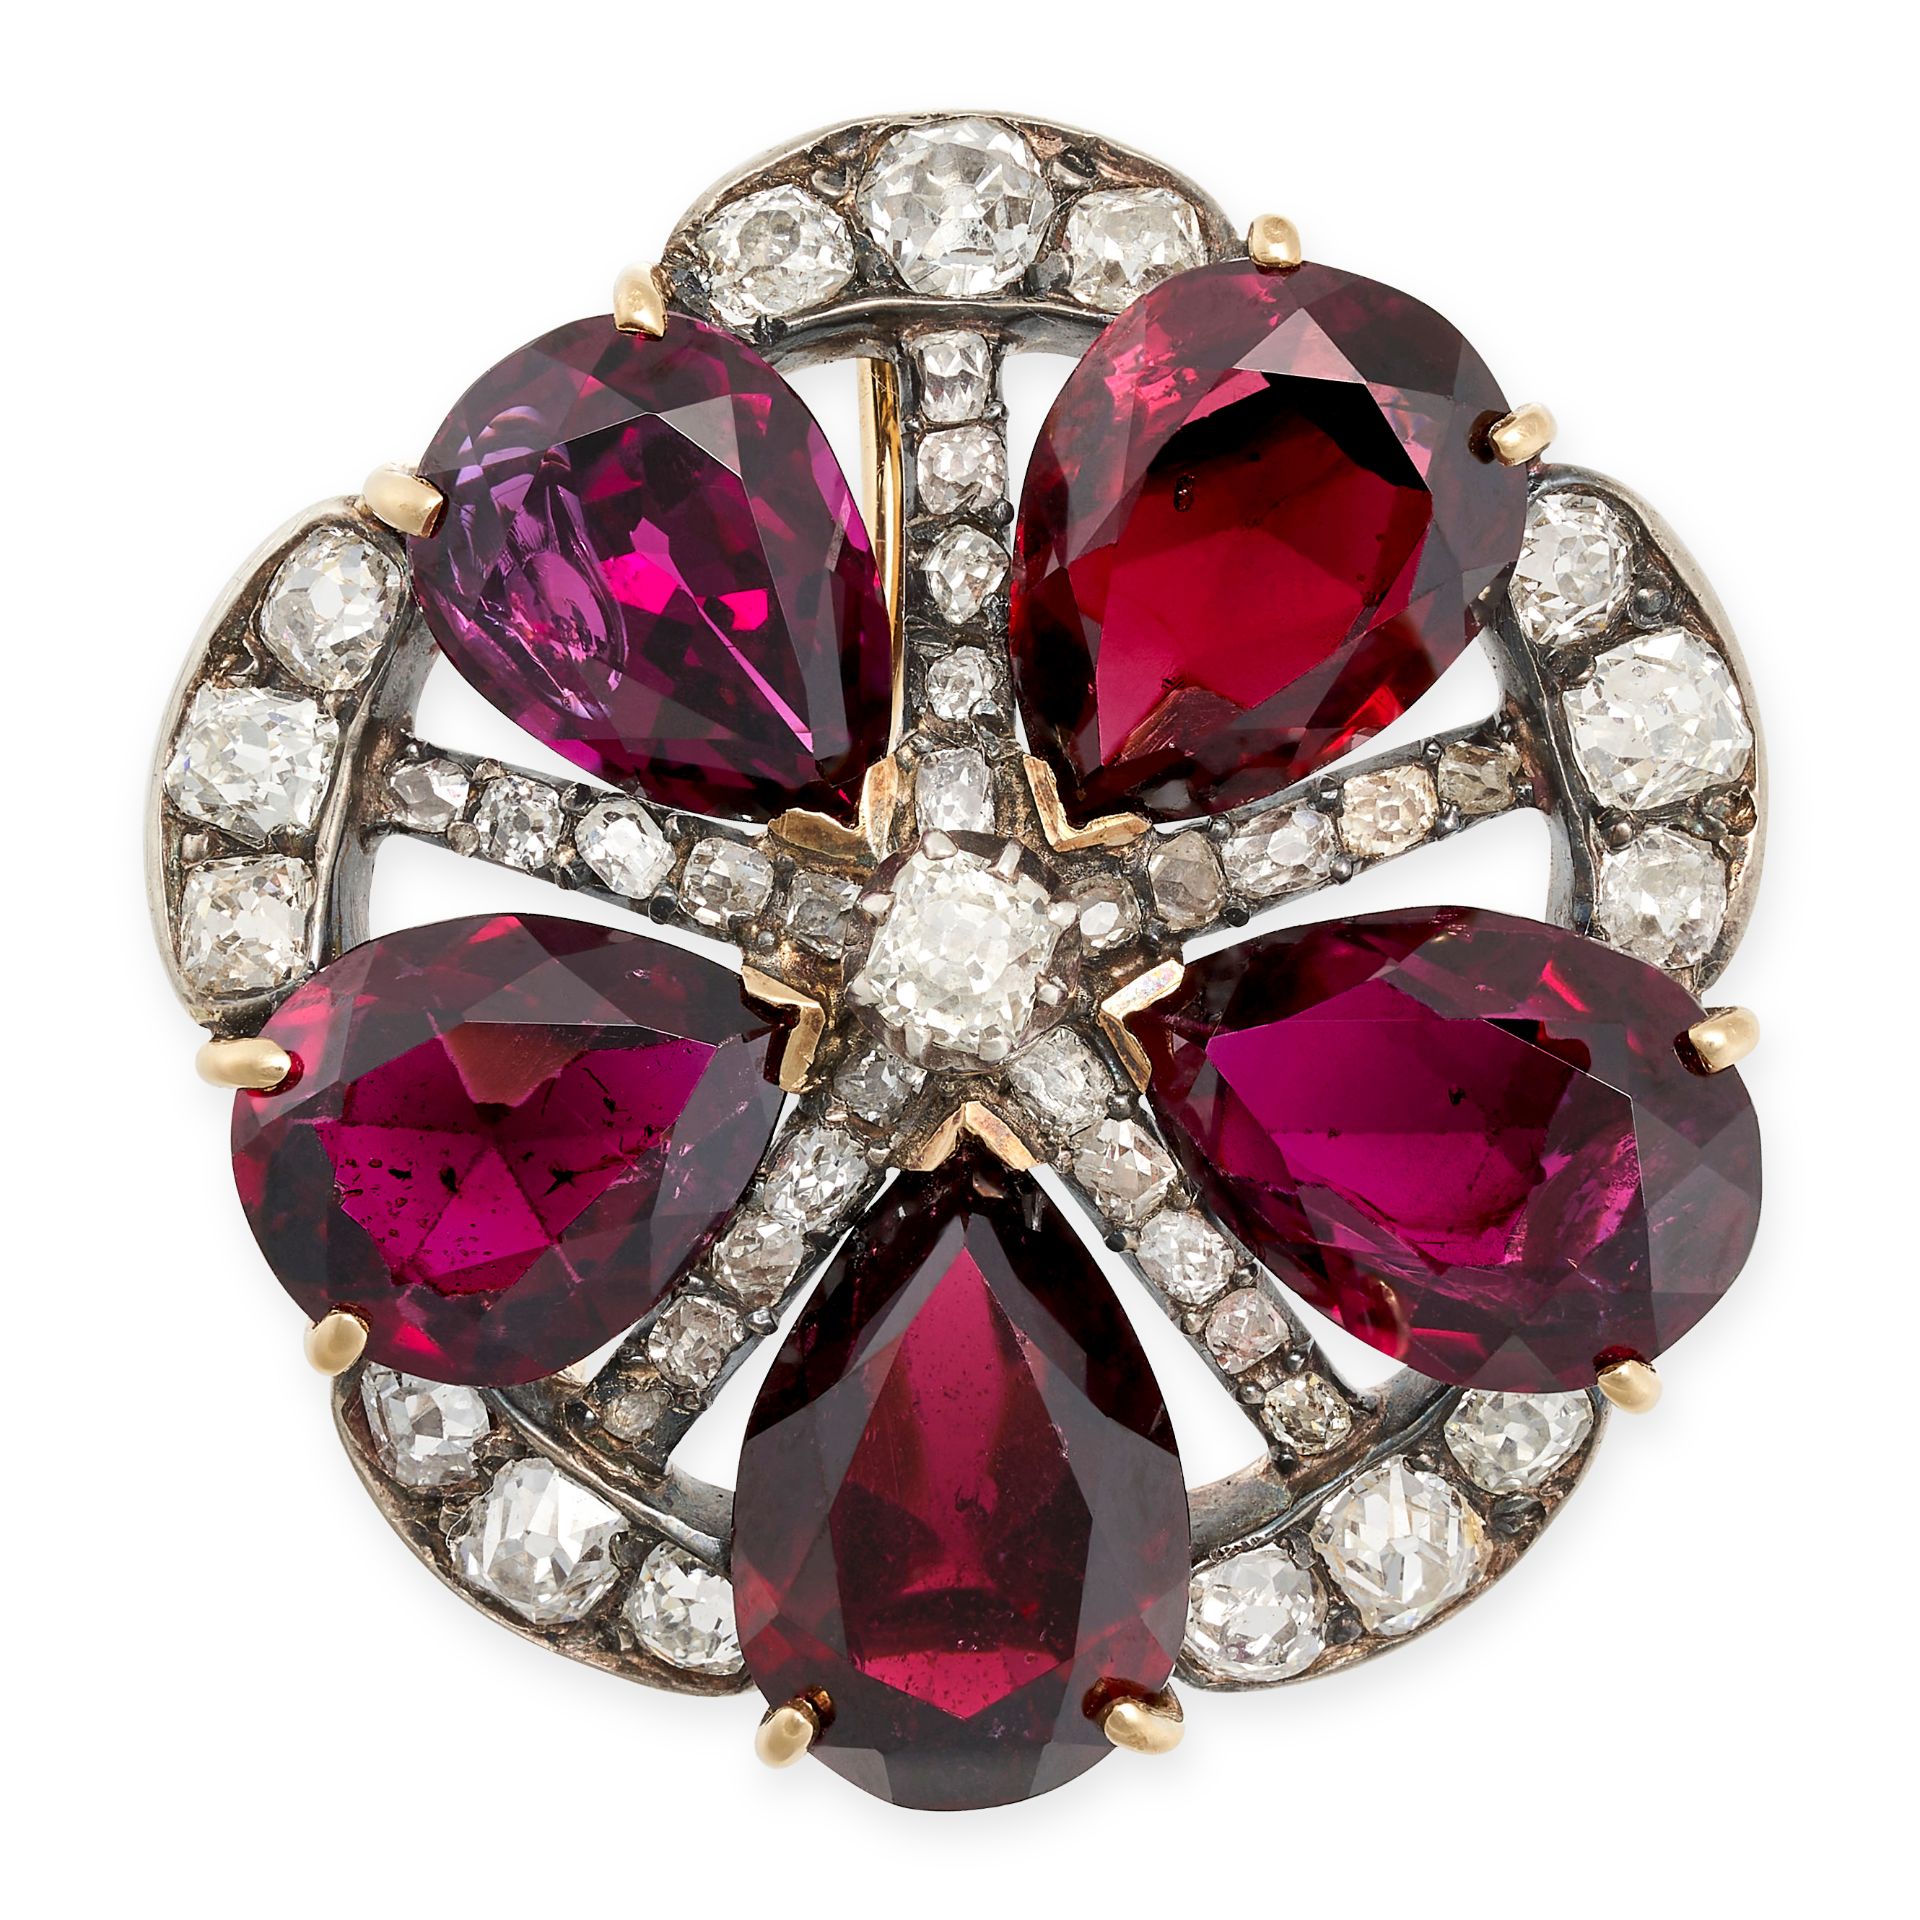 AN ANTIQUE GARNET AND DIAMOND BROOCH in yellow gold and silver, designed as a stylised flower set...